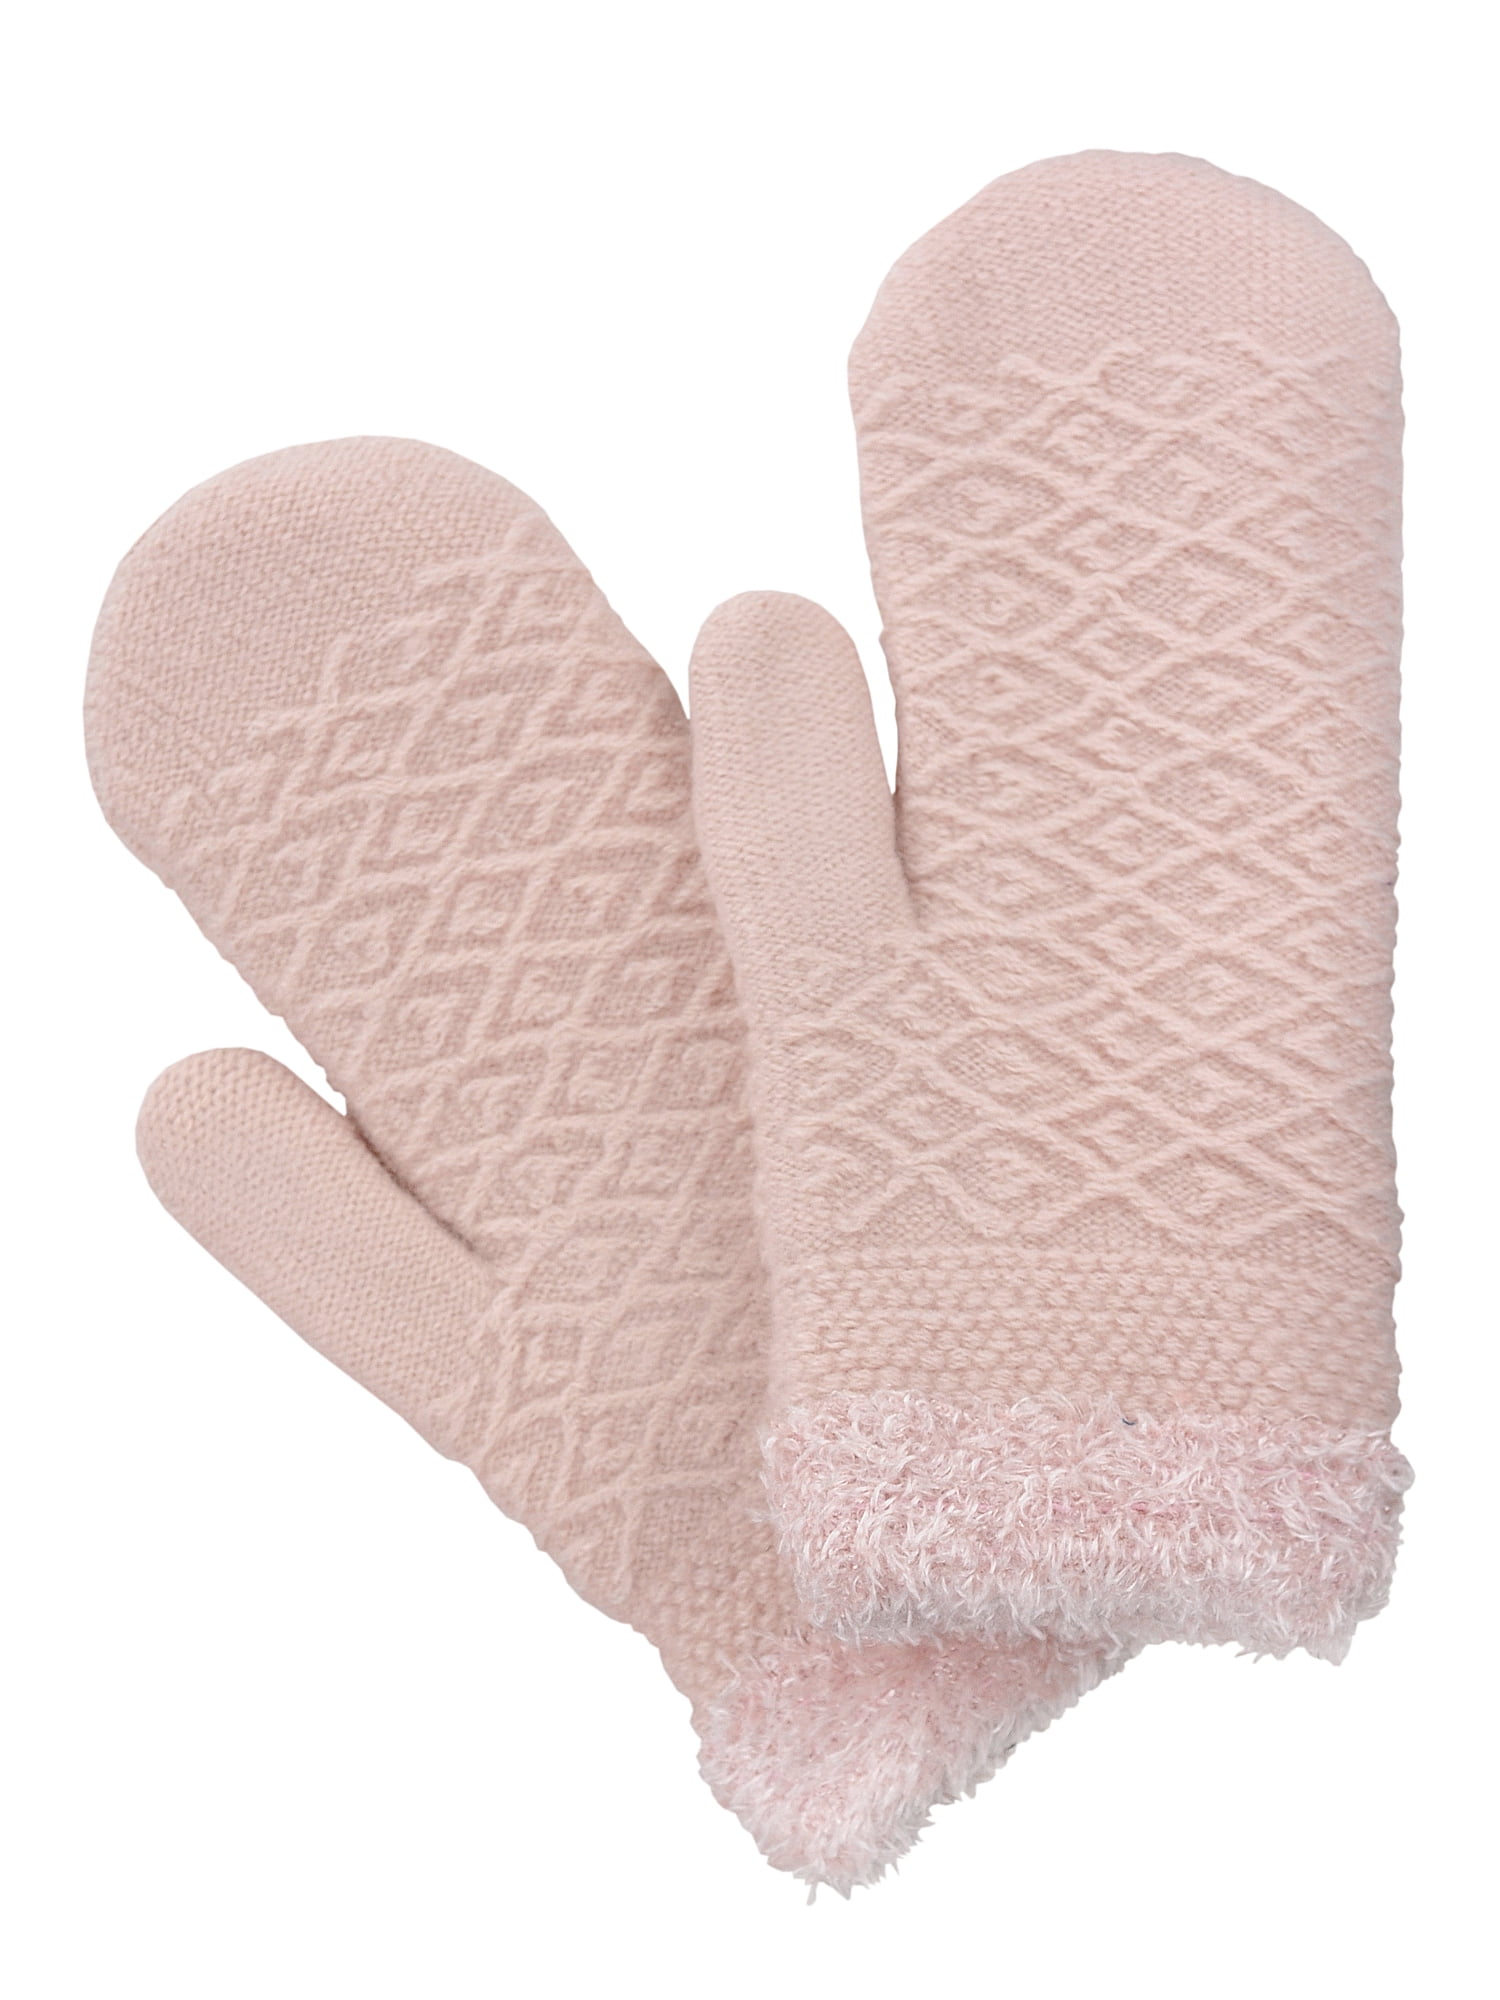 D&Y Women's Winter Warm Knit Plush Lined Stretchy Snug Fit Mittens 